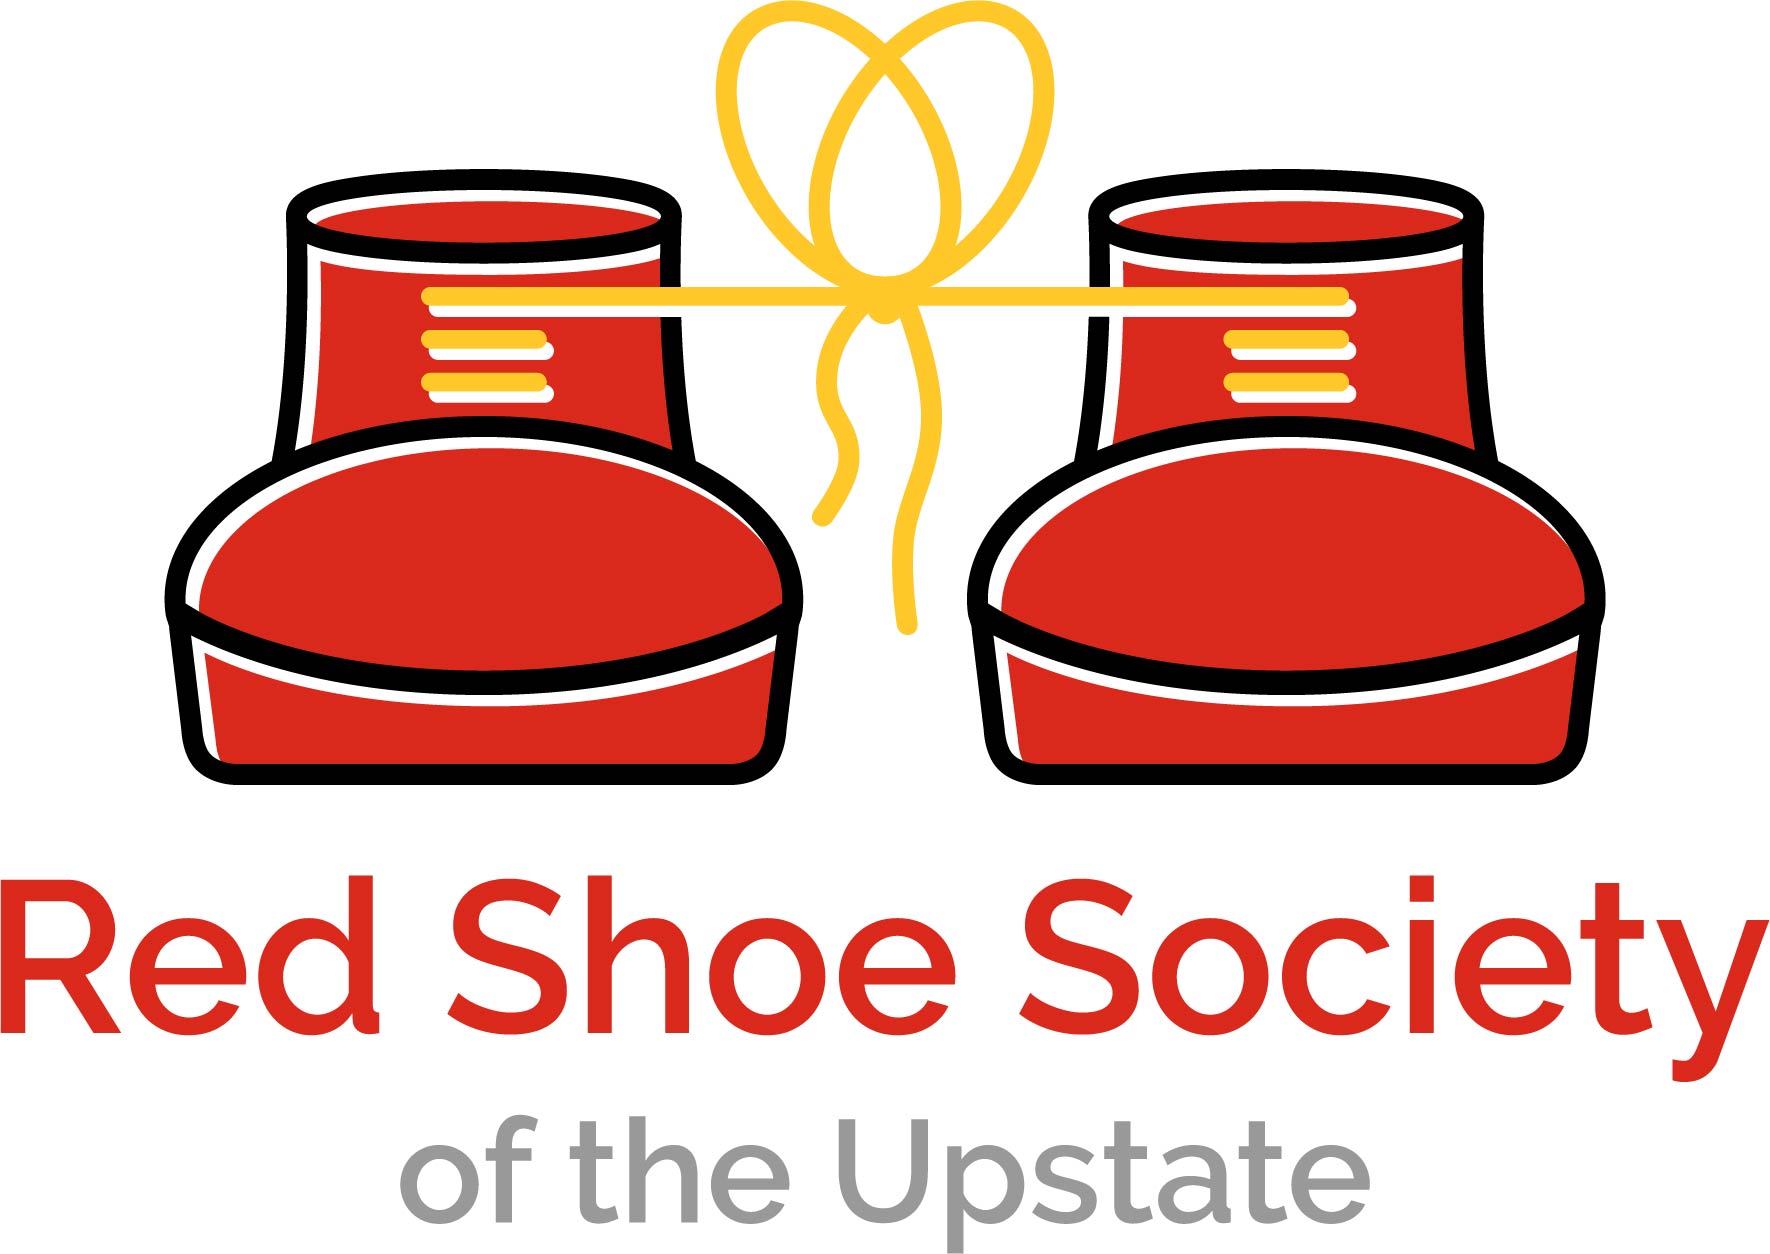 Red Shoe Society Ronald McDonald House Charities of the